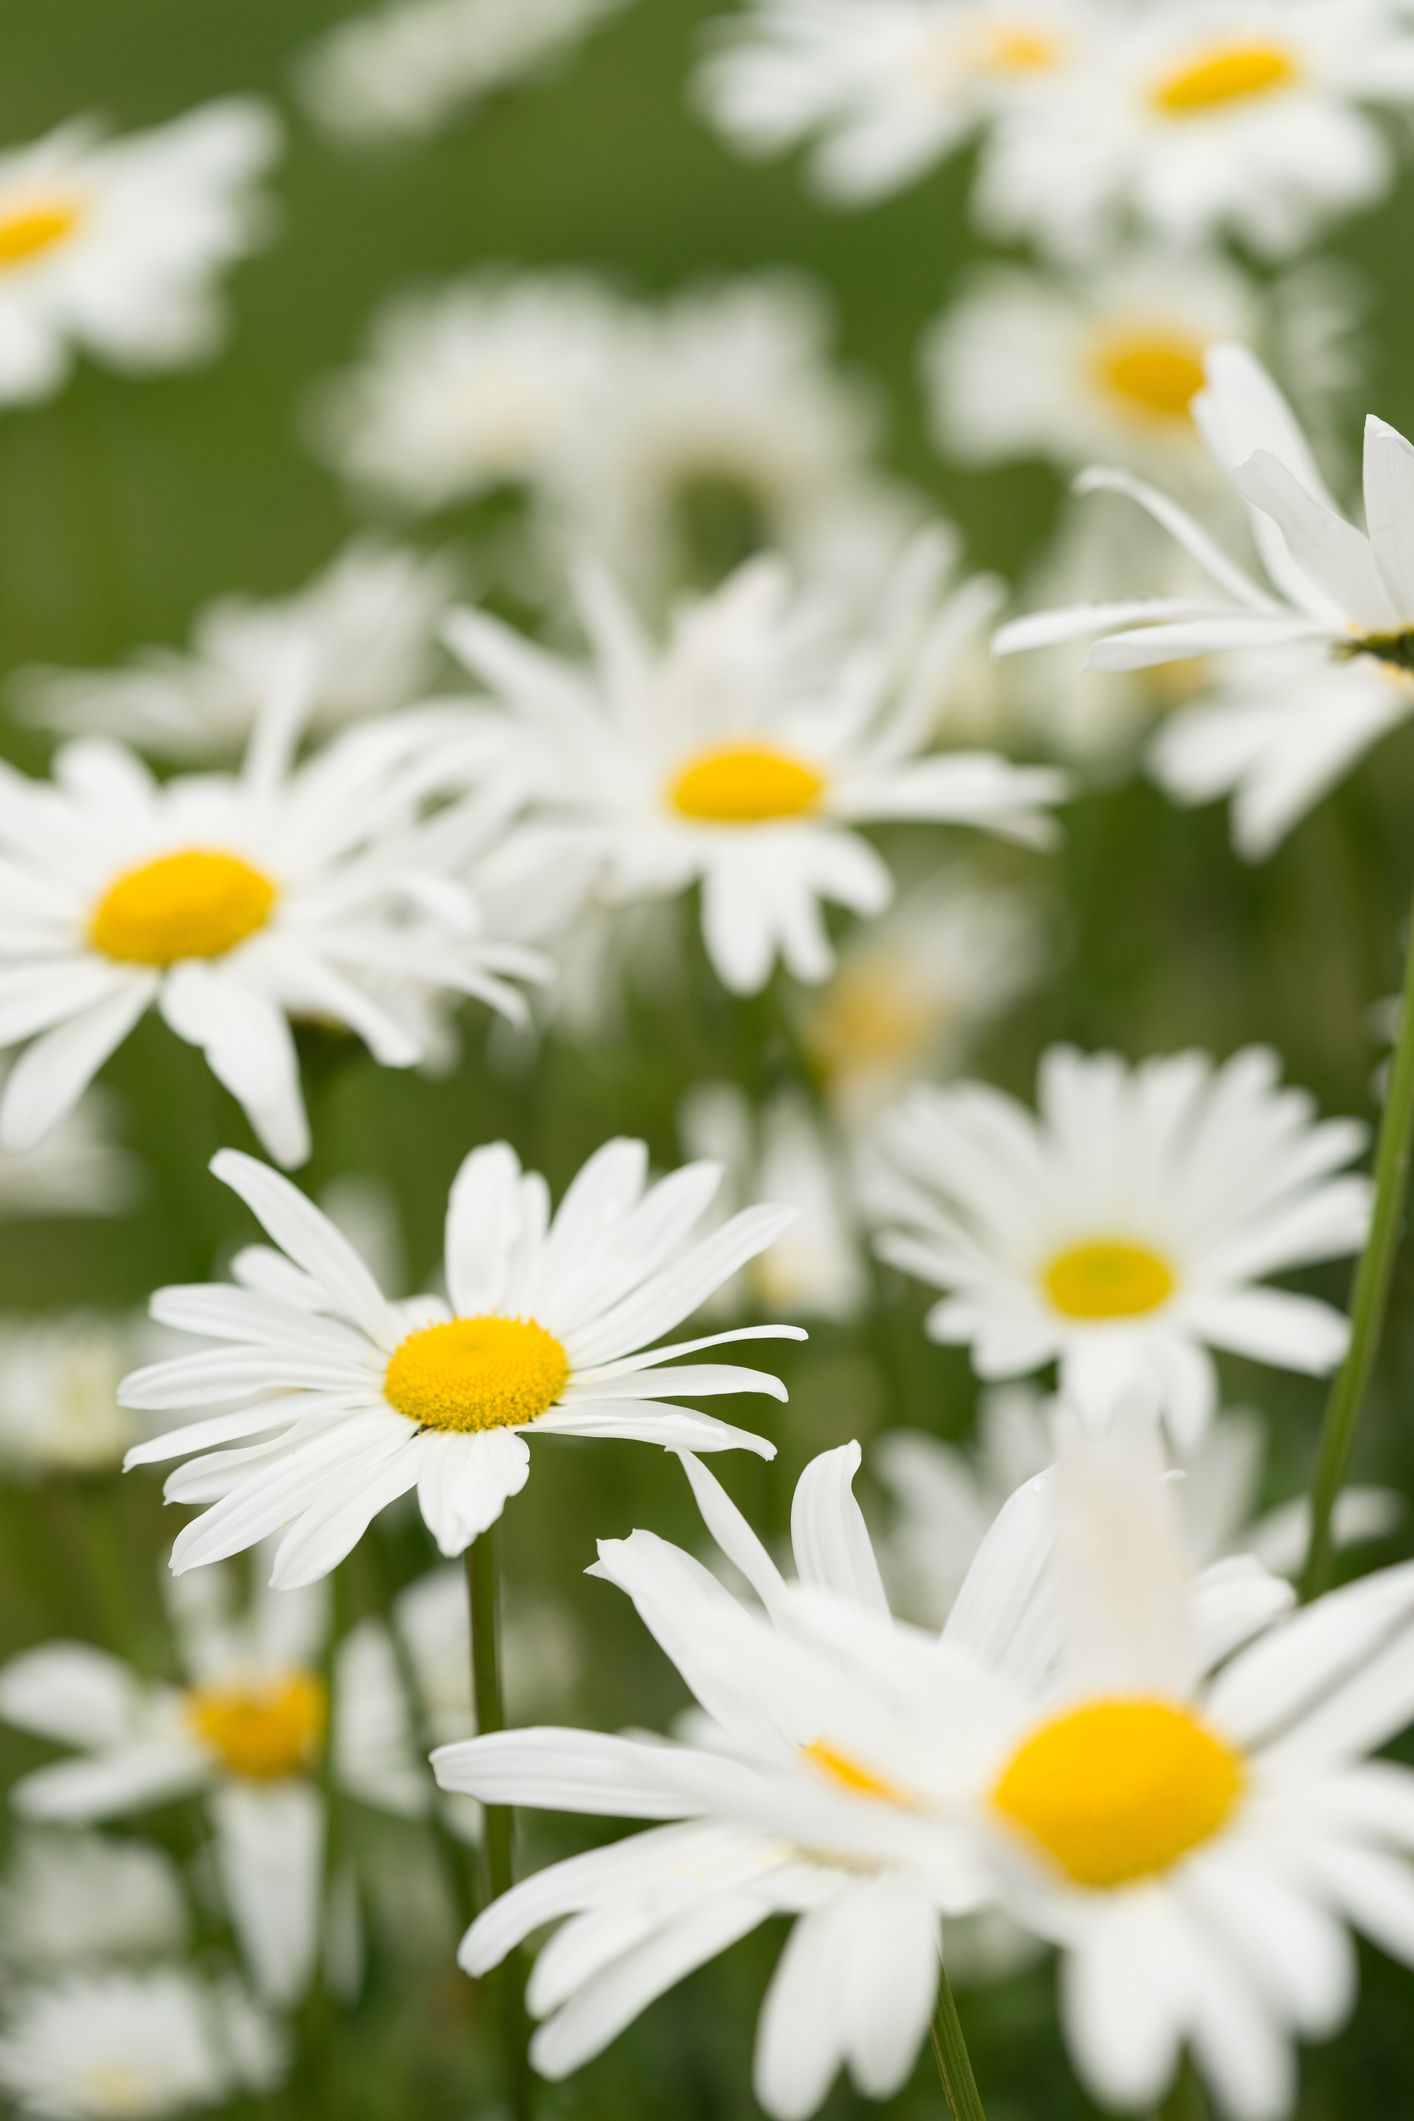 Pictures of daisies